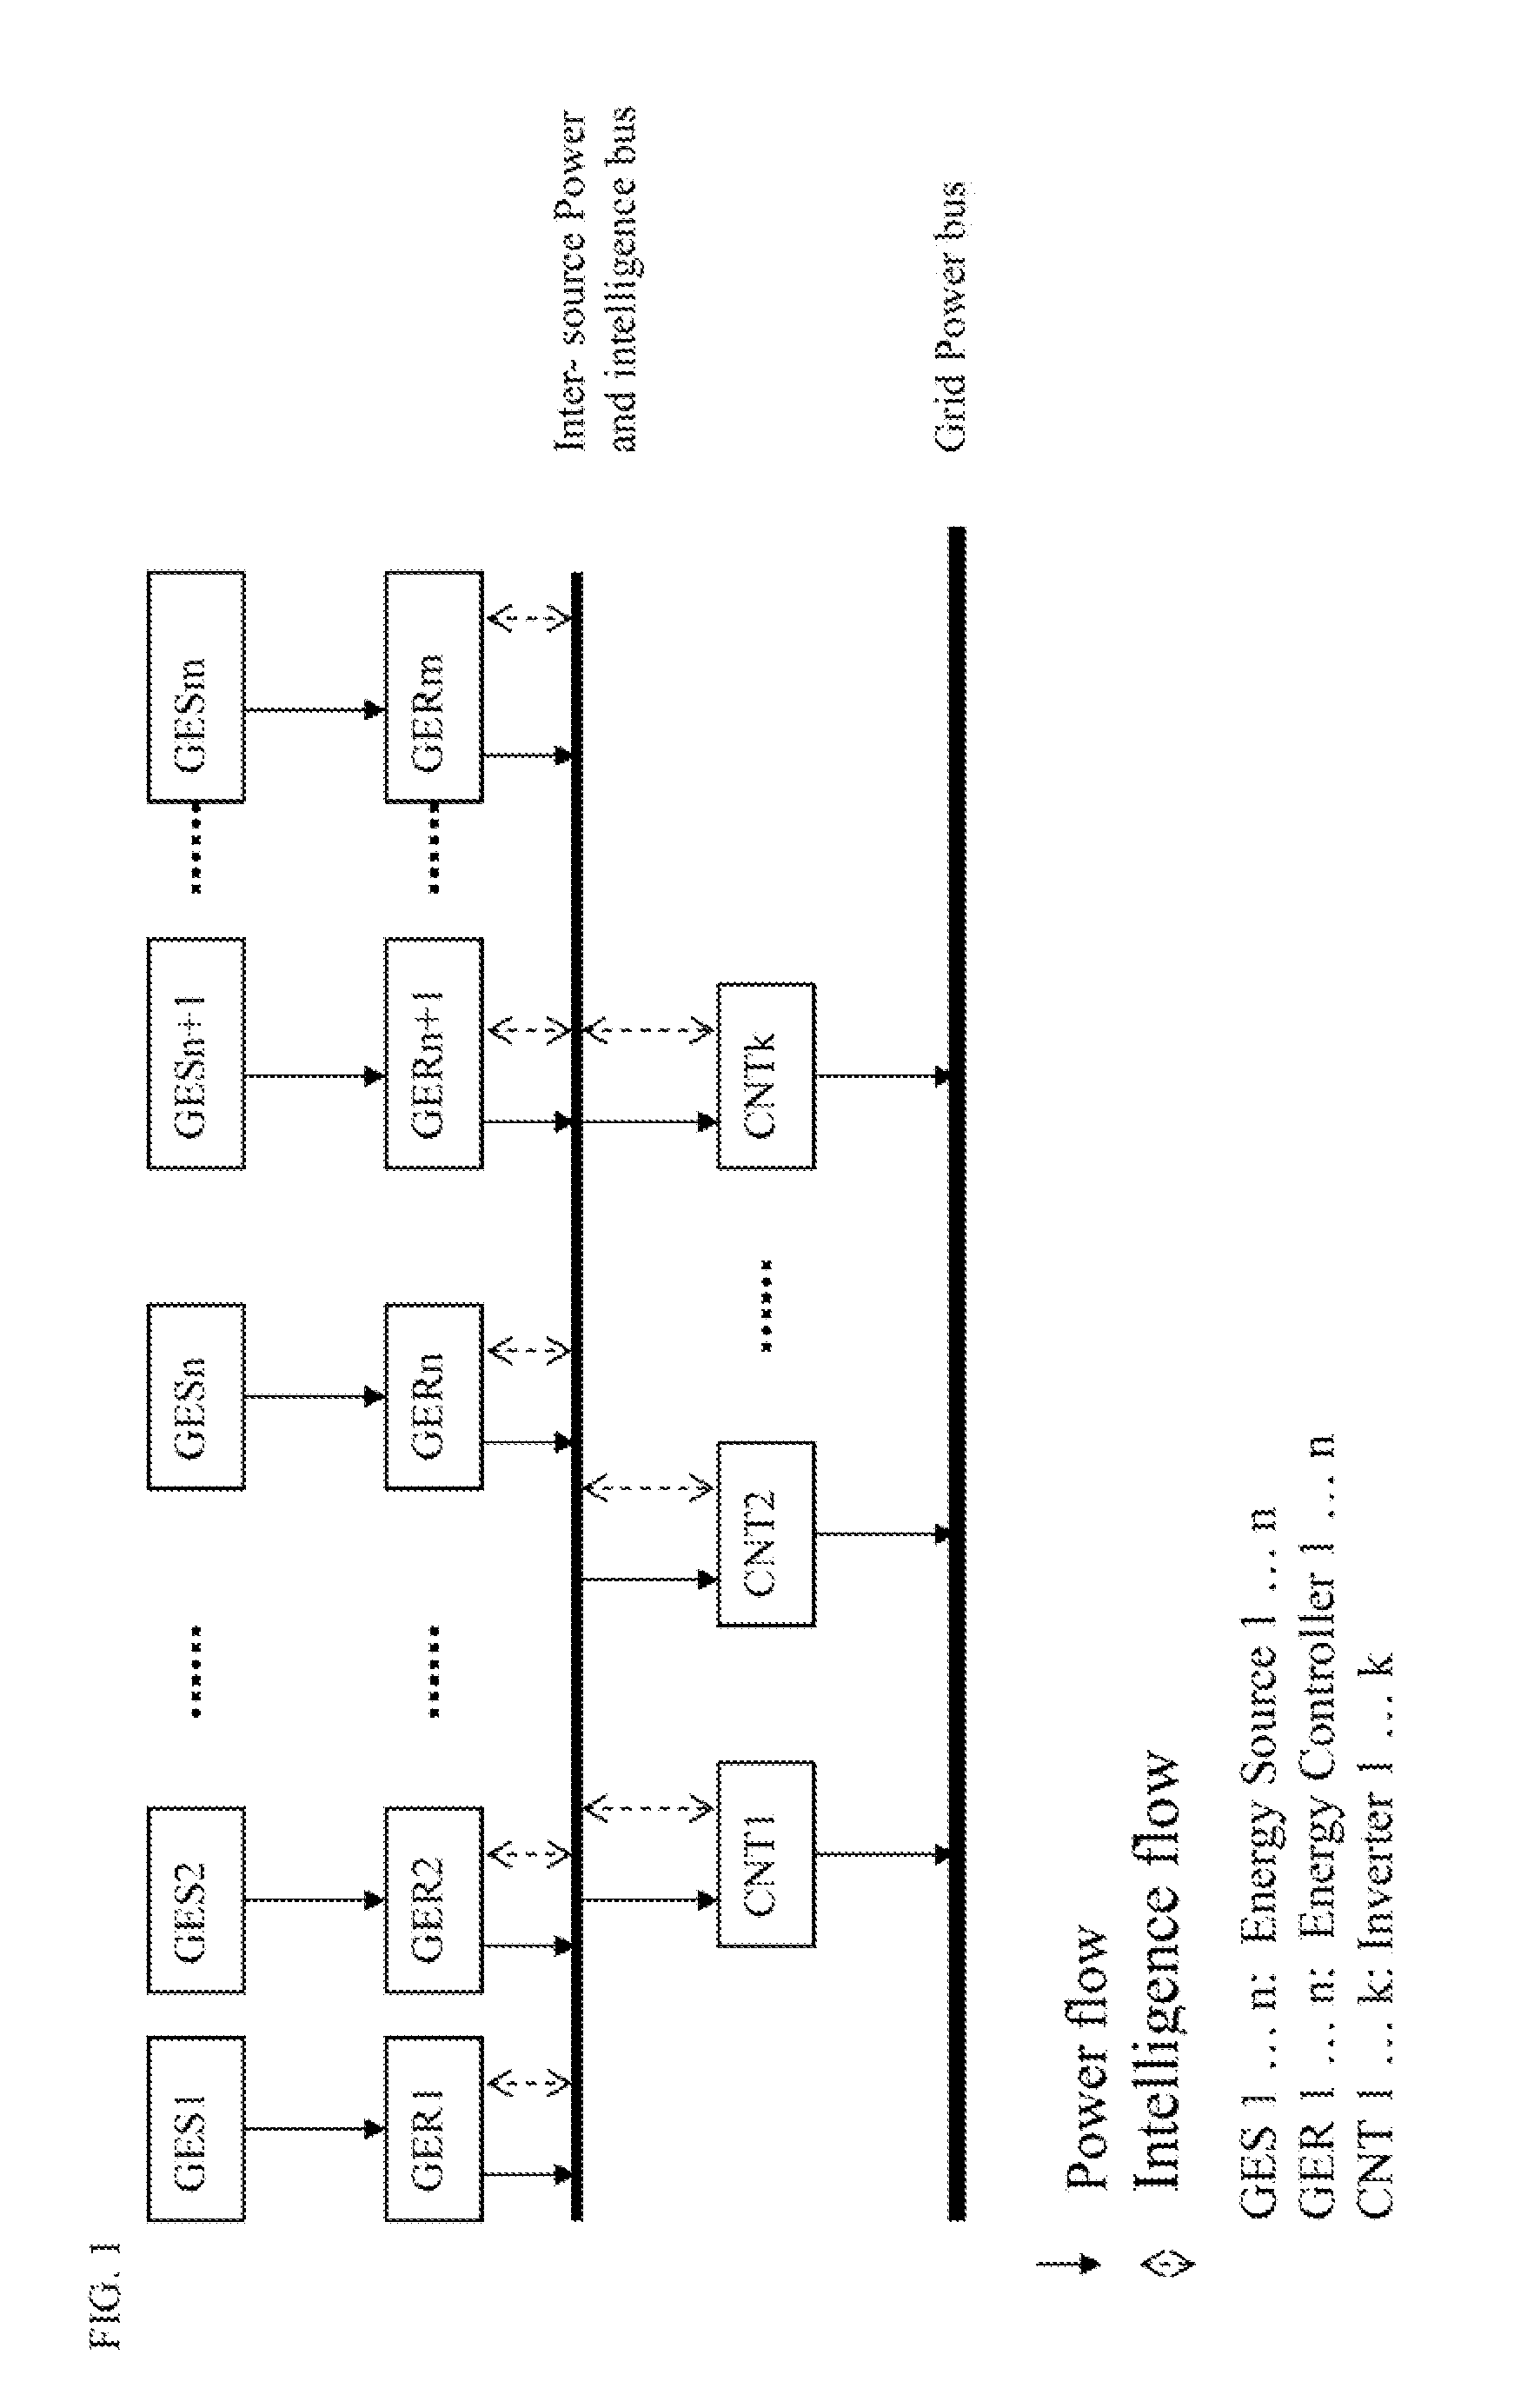 Method and apparatus for multi-source electrical energy grid-tied transformation